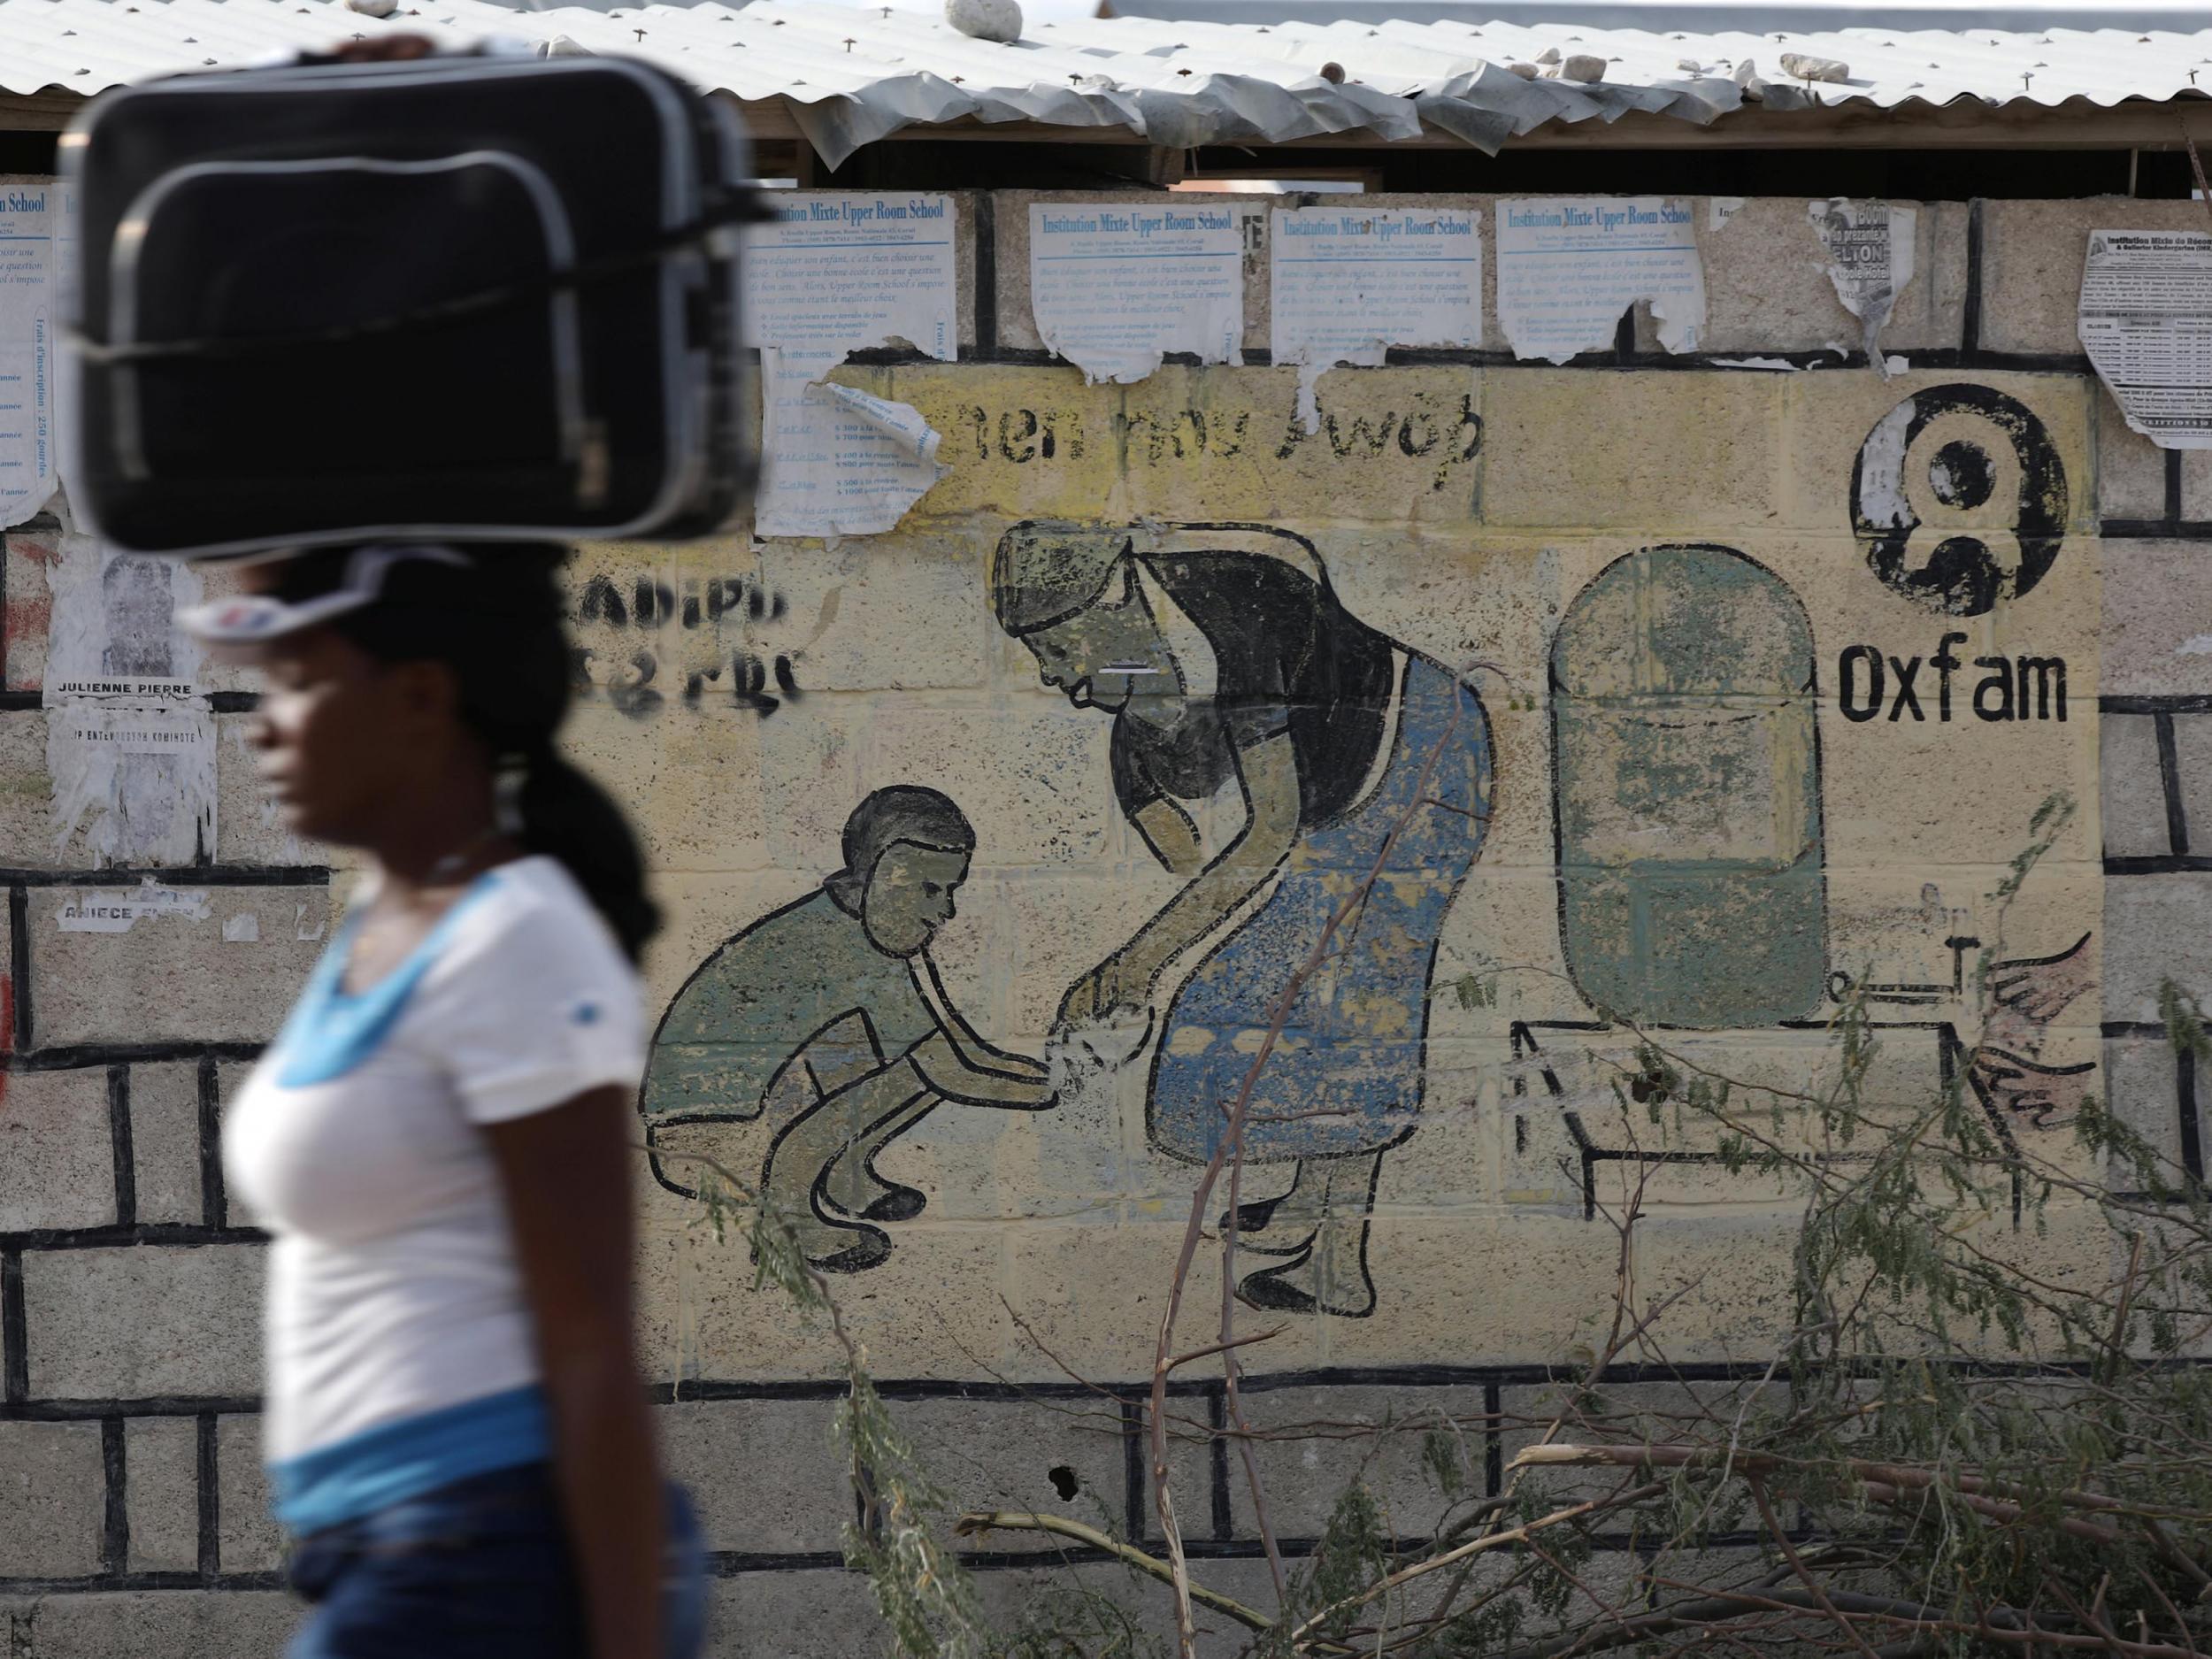 A woman walks carrying a suitcase on her head next to an Oxfam sign in Corail, a camp for displaced people of the 2010 earthquake, on the outskirts of Port-au-Prince, Haiti